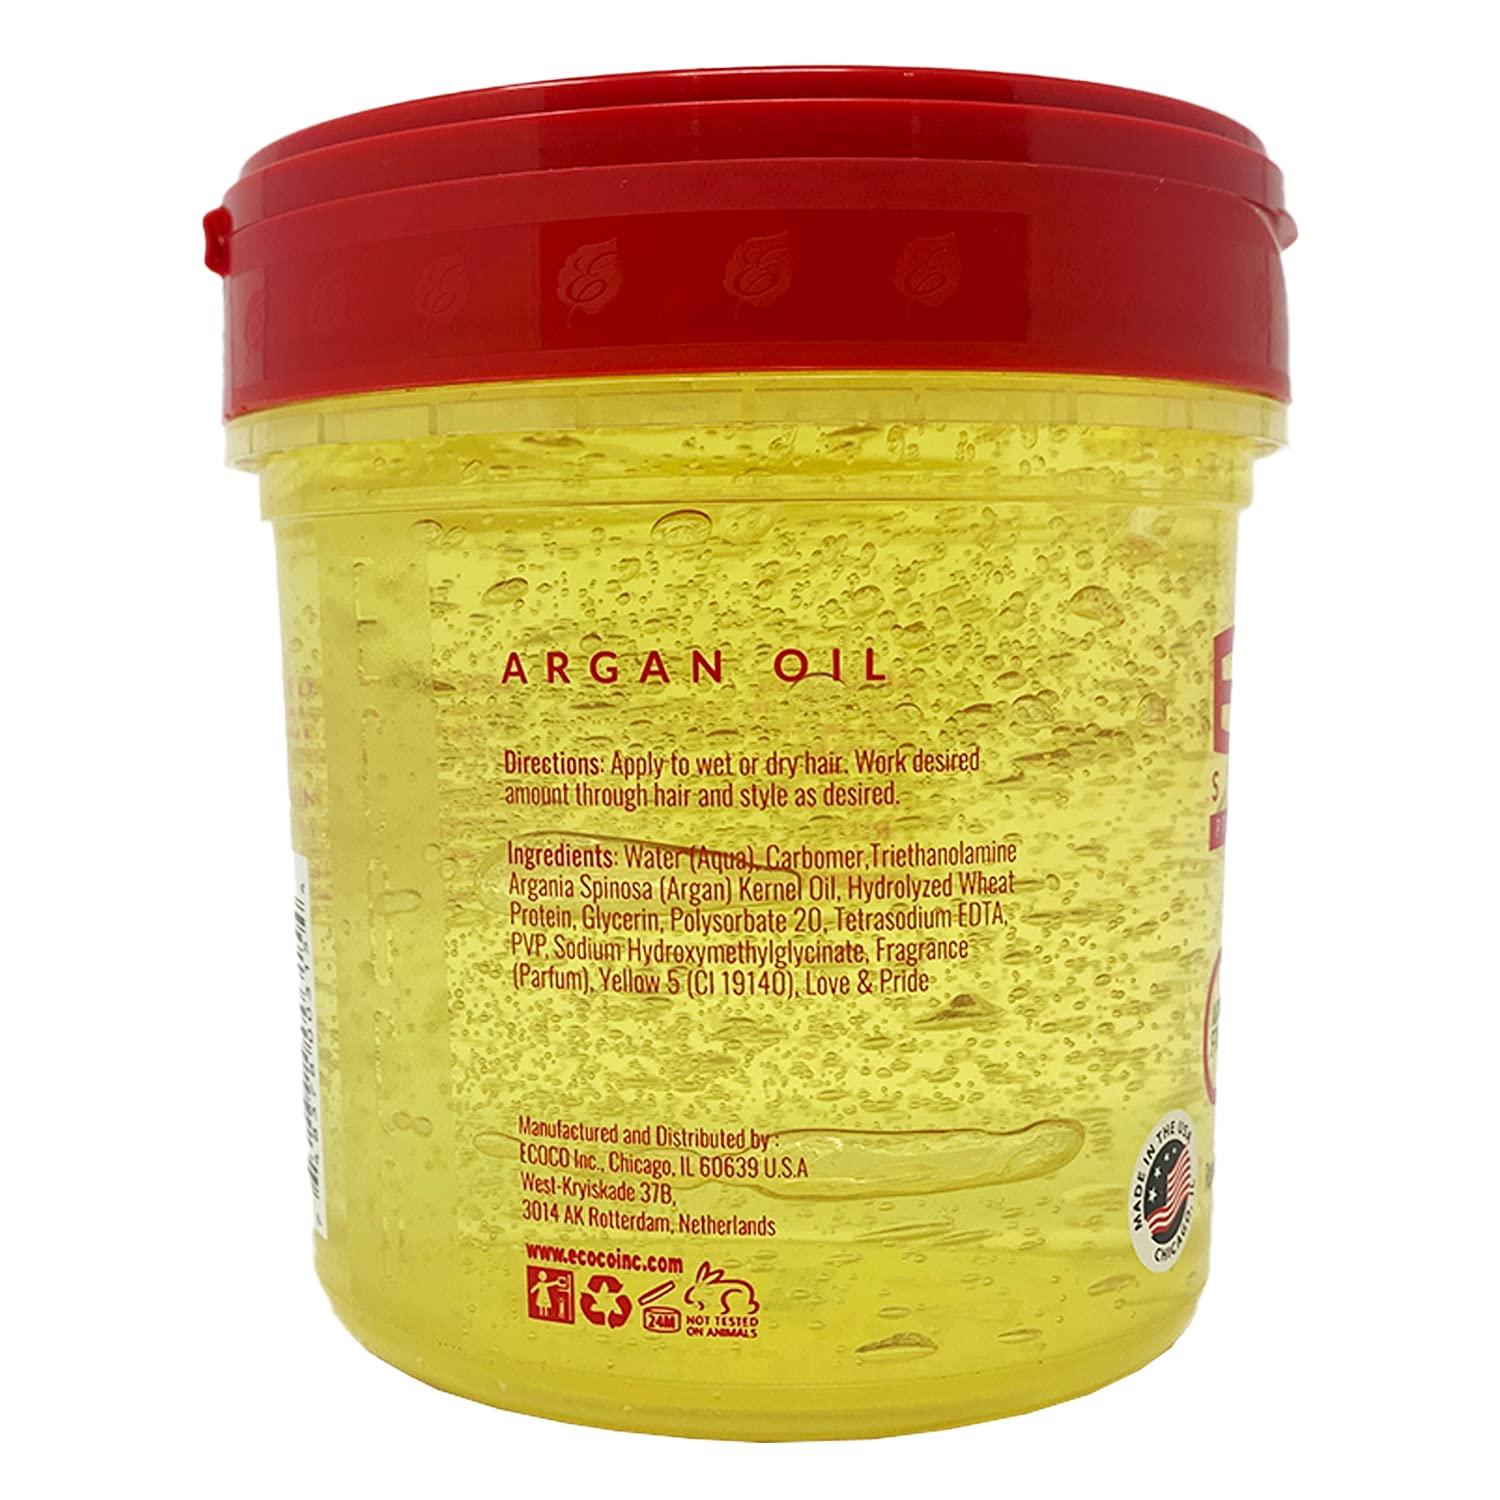 Ecoco Eco Styler Professional Styling Gel with Argan Oil (16 oz.)